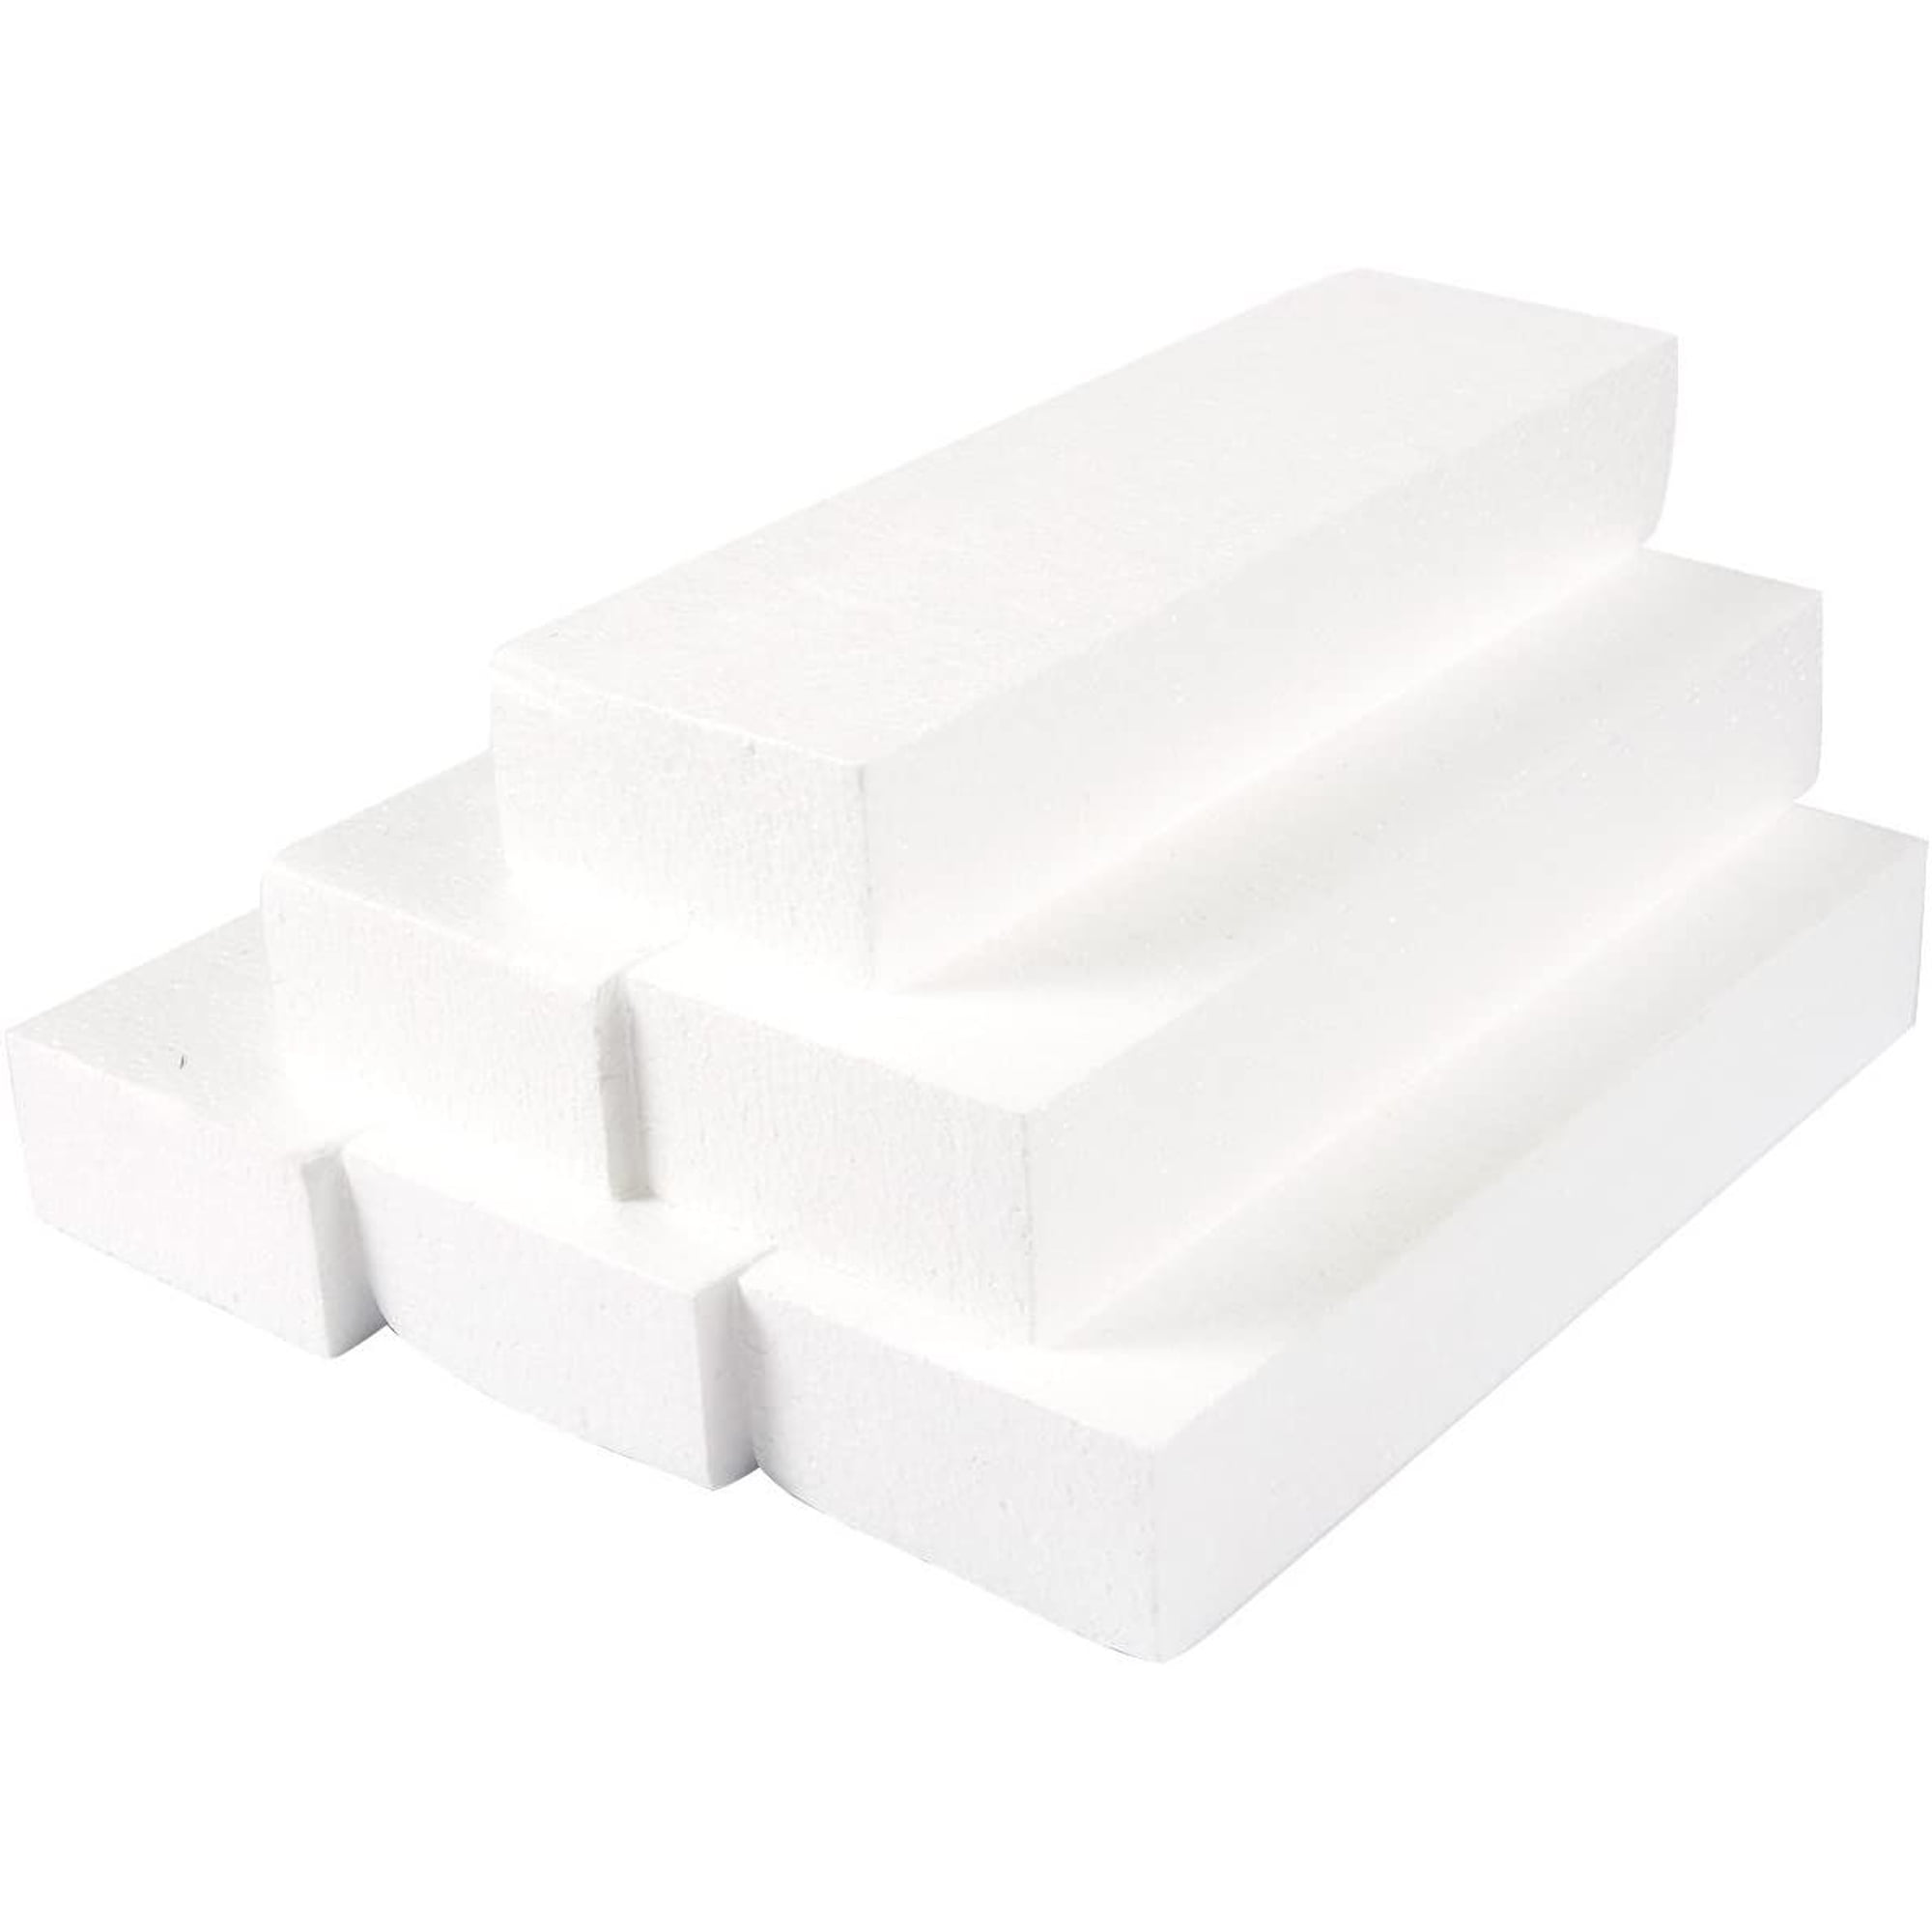 4 Pcs Customizable Polyethylene Foam Packing Foam Inserts for Cases Tool  Foam Black Foam Sheet for Packaging and Crafts 